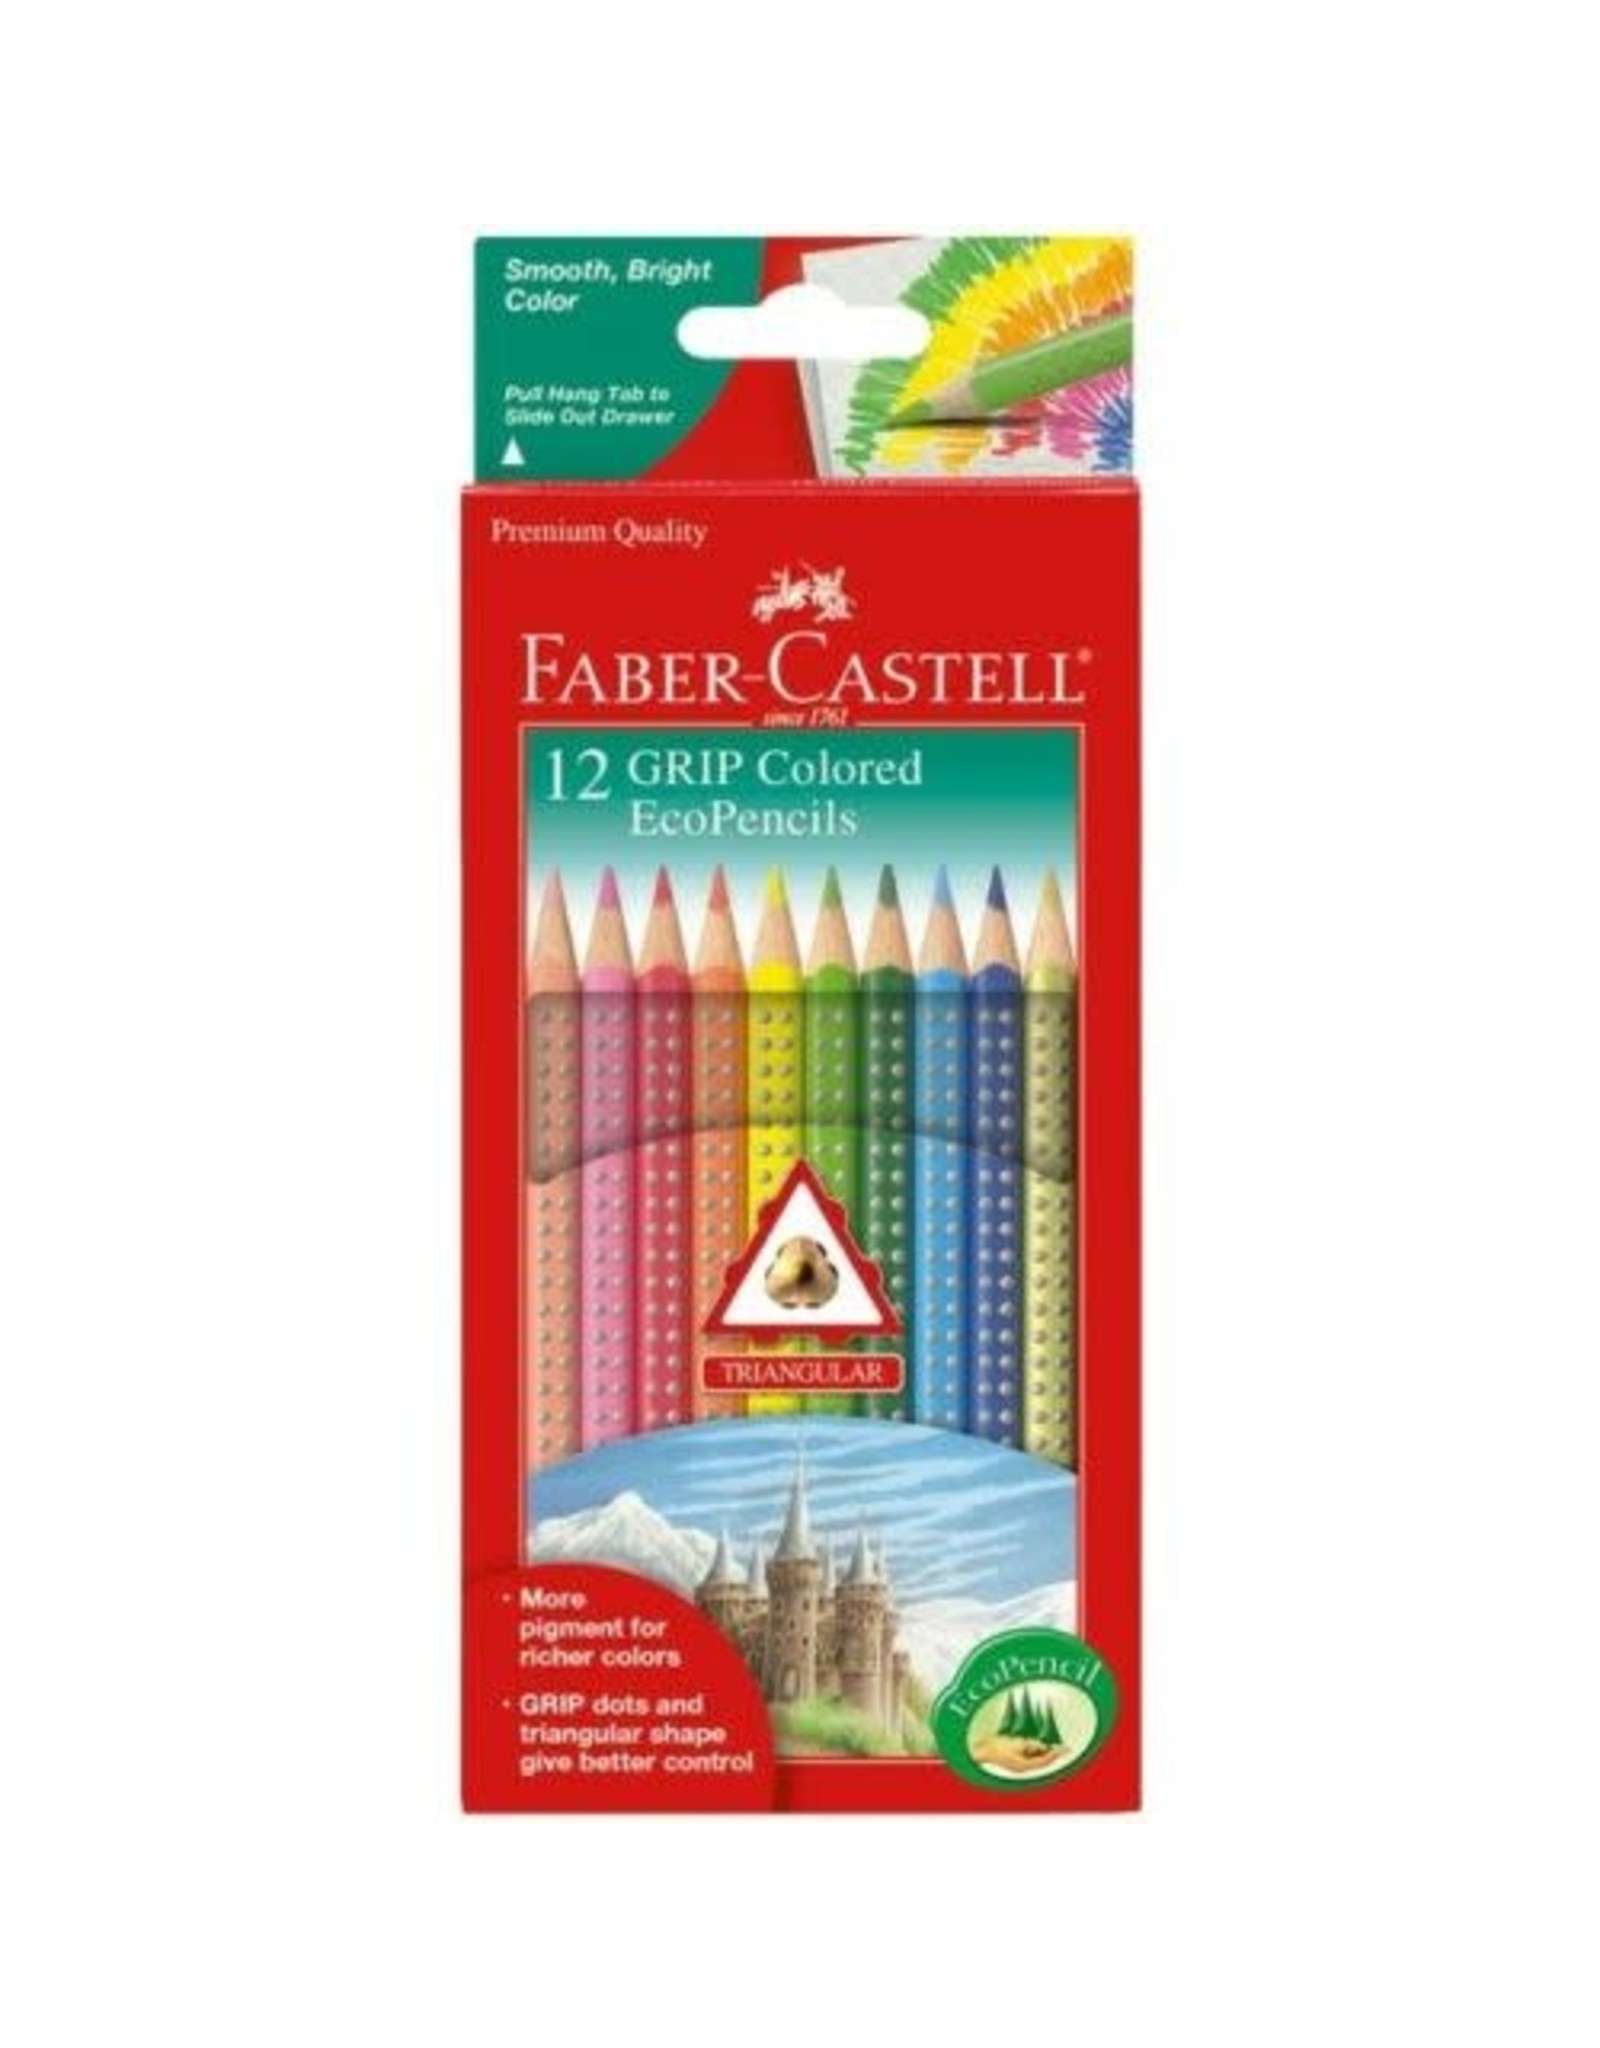 FABER-CASTELL Faber-Castell Grip Colored EcoPencils, Set of 12